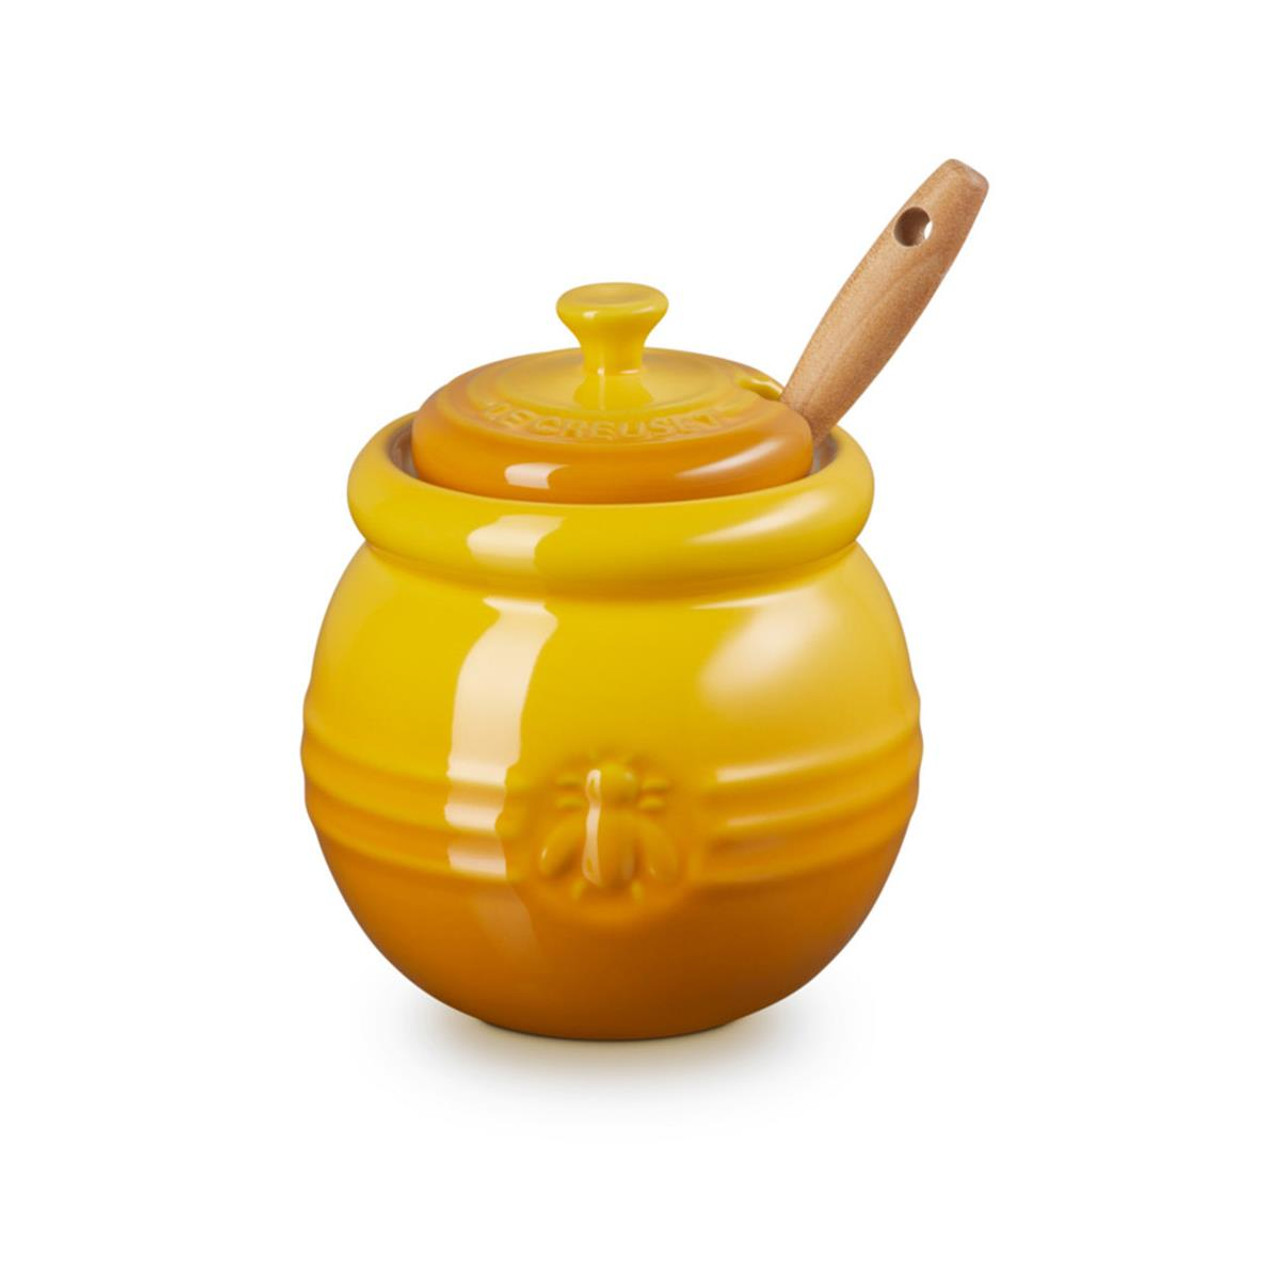 How to handle a morning time crunch with le creuset honey pot?